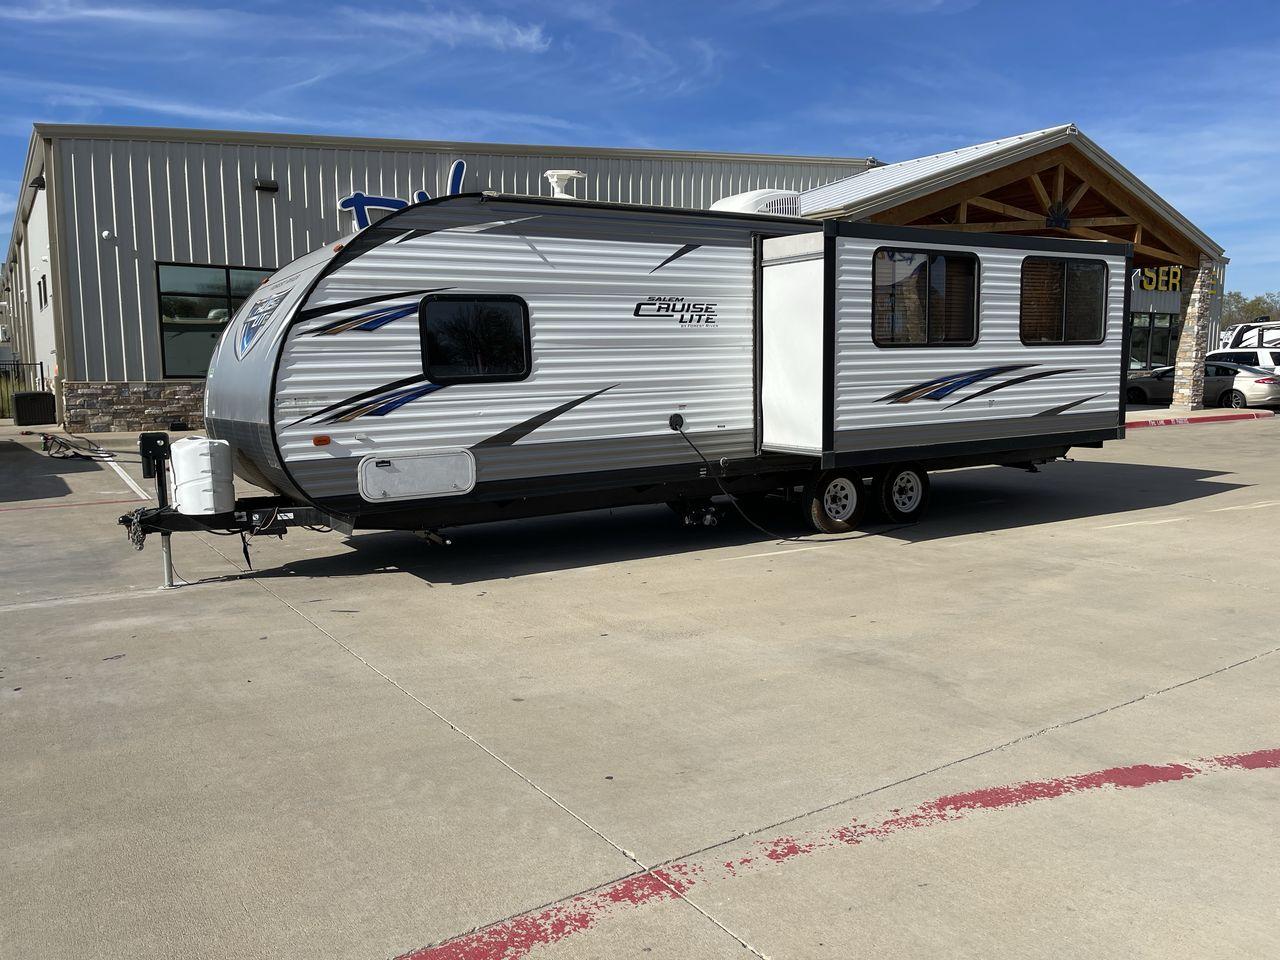 2017 WHITE FOREST RIVER SALEM CRUISE LITE 25 (4X4TSMA2XH7) , Length: 30.92 ft. | Dry Weight: 6,063 lbs. | Gross Weight: 7,685 lbs. | Slides: 1 transmission, located at 4319 N Main St, Cleburne, TX, 76033, (817) 678-5133, 32.385960, -97.391212 - Introducing the 2017 Forest River Salem Cruise Lite 254RLXL, a meticulously crafted travel trailer that will revolutionize your camping adventures. This model offers a great balance between spaciousness and ease of towing, with a length of 30.92 feet and a dry weight of 6,063 lbs. The Salem Cruise L - Photo #22